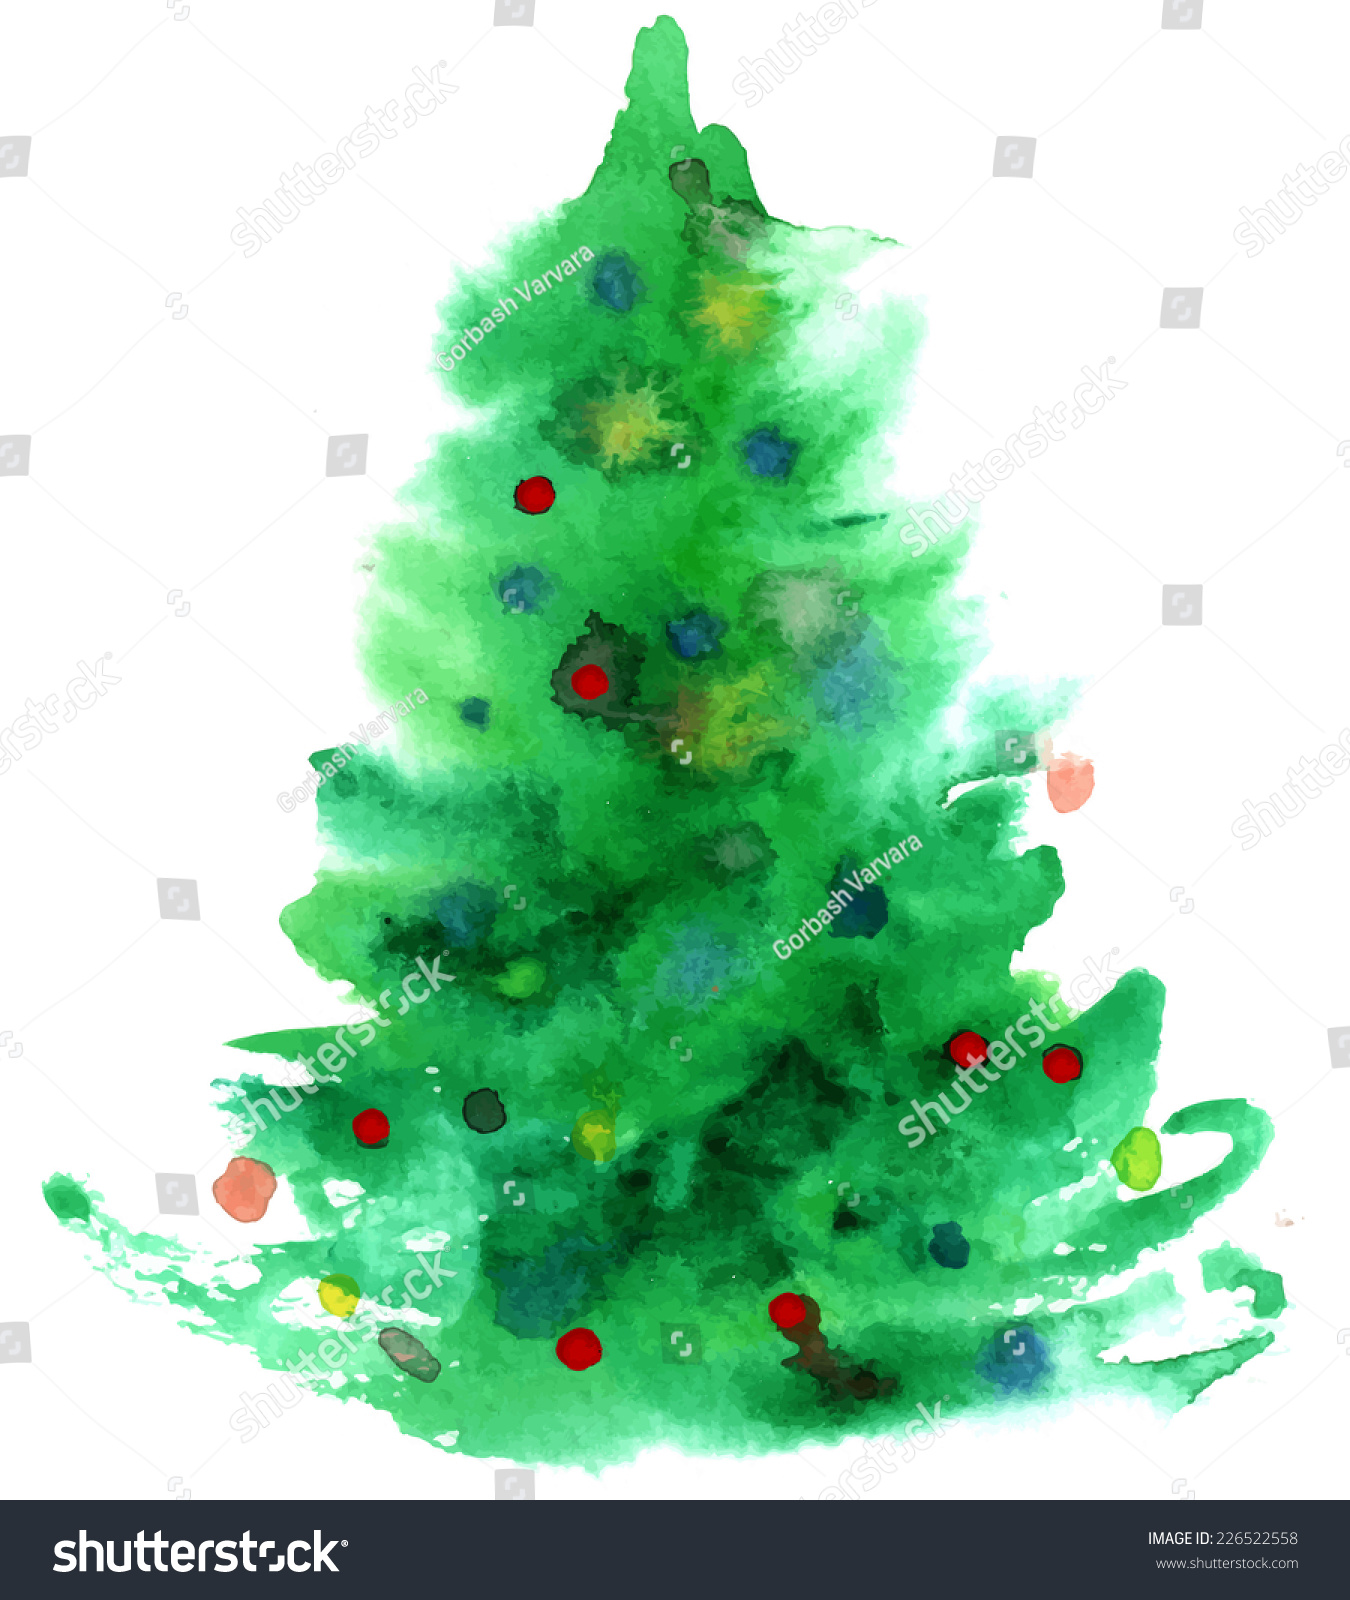 Download Watercolor Christmas Tree Isolated On White Stock Vector 226522558 - Shutterstock